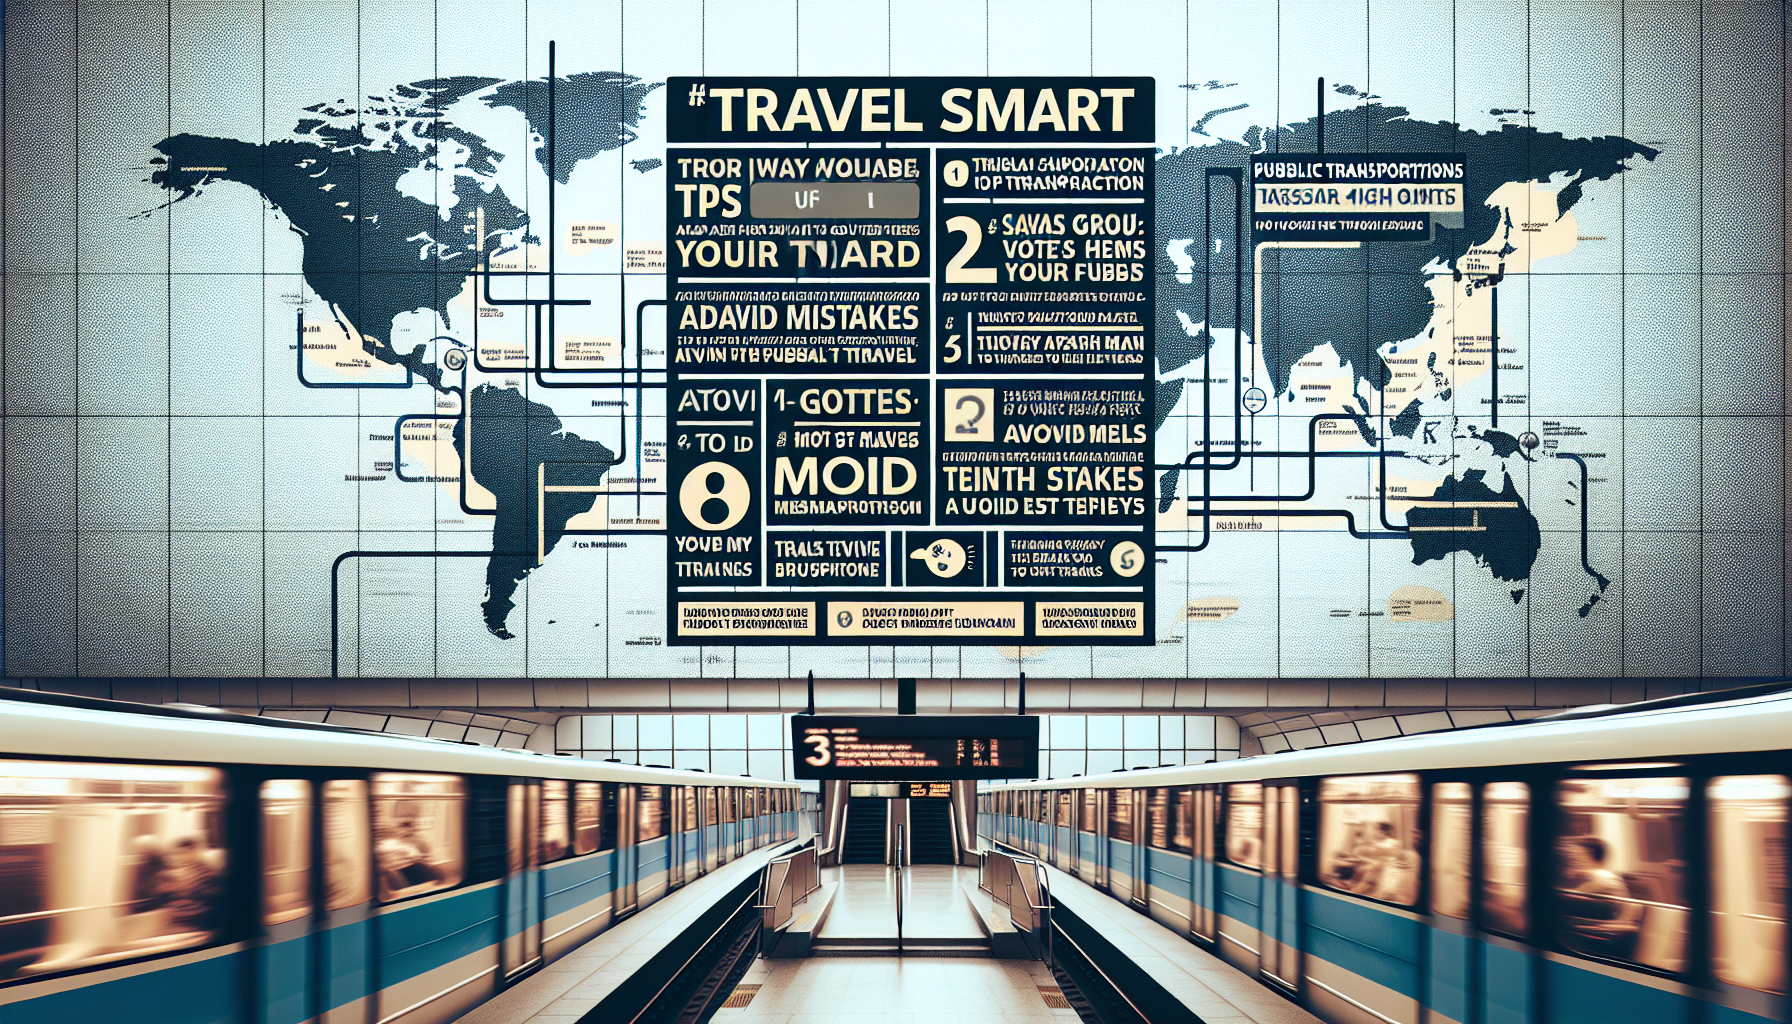 discover the common mistakes to avoid when navigating public transportation in foreign cities and make your travel experience hassle-free.